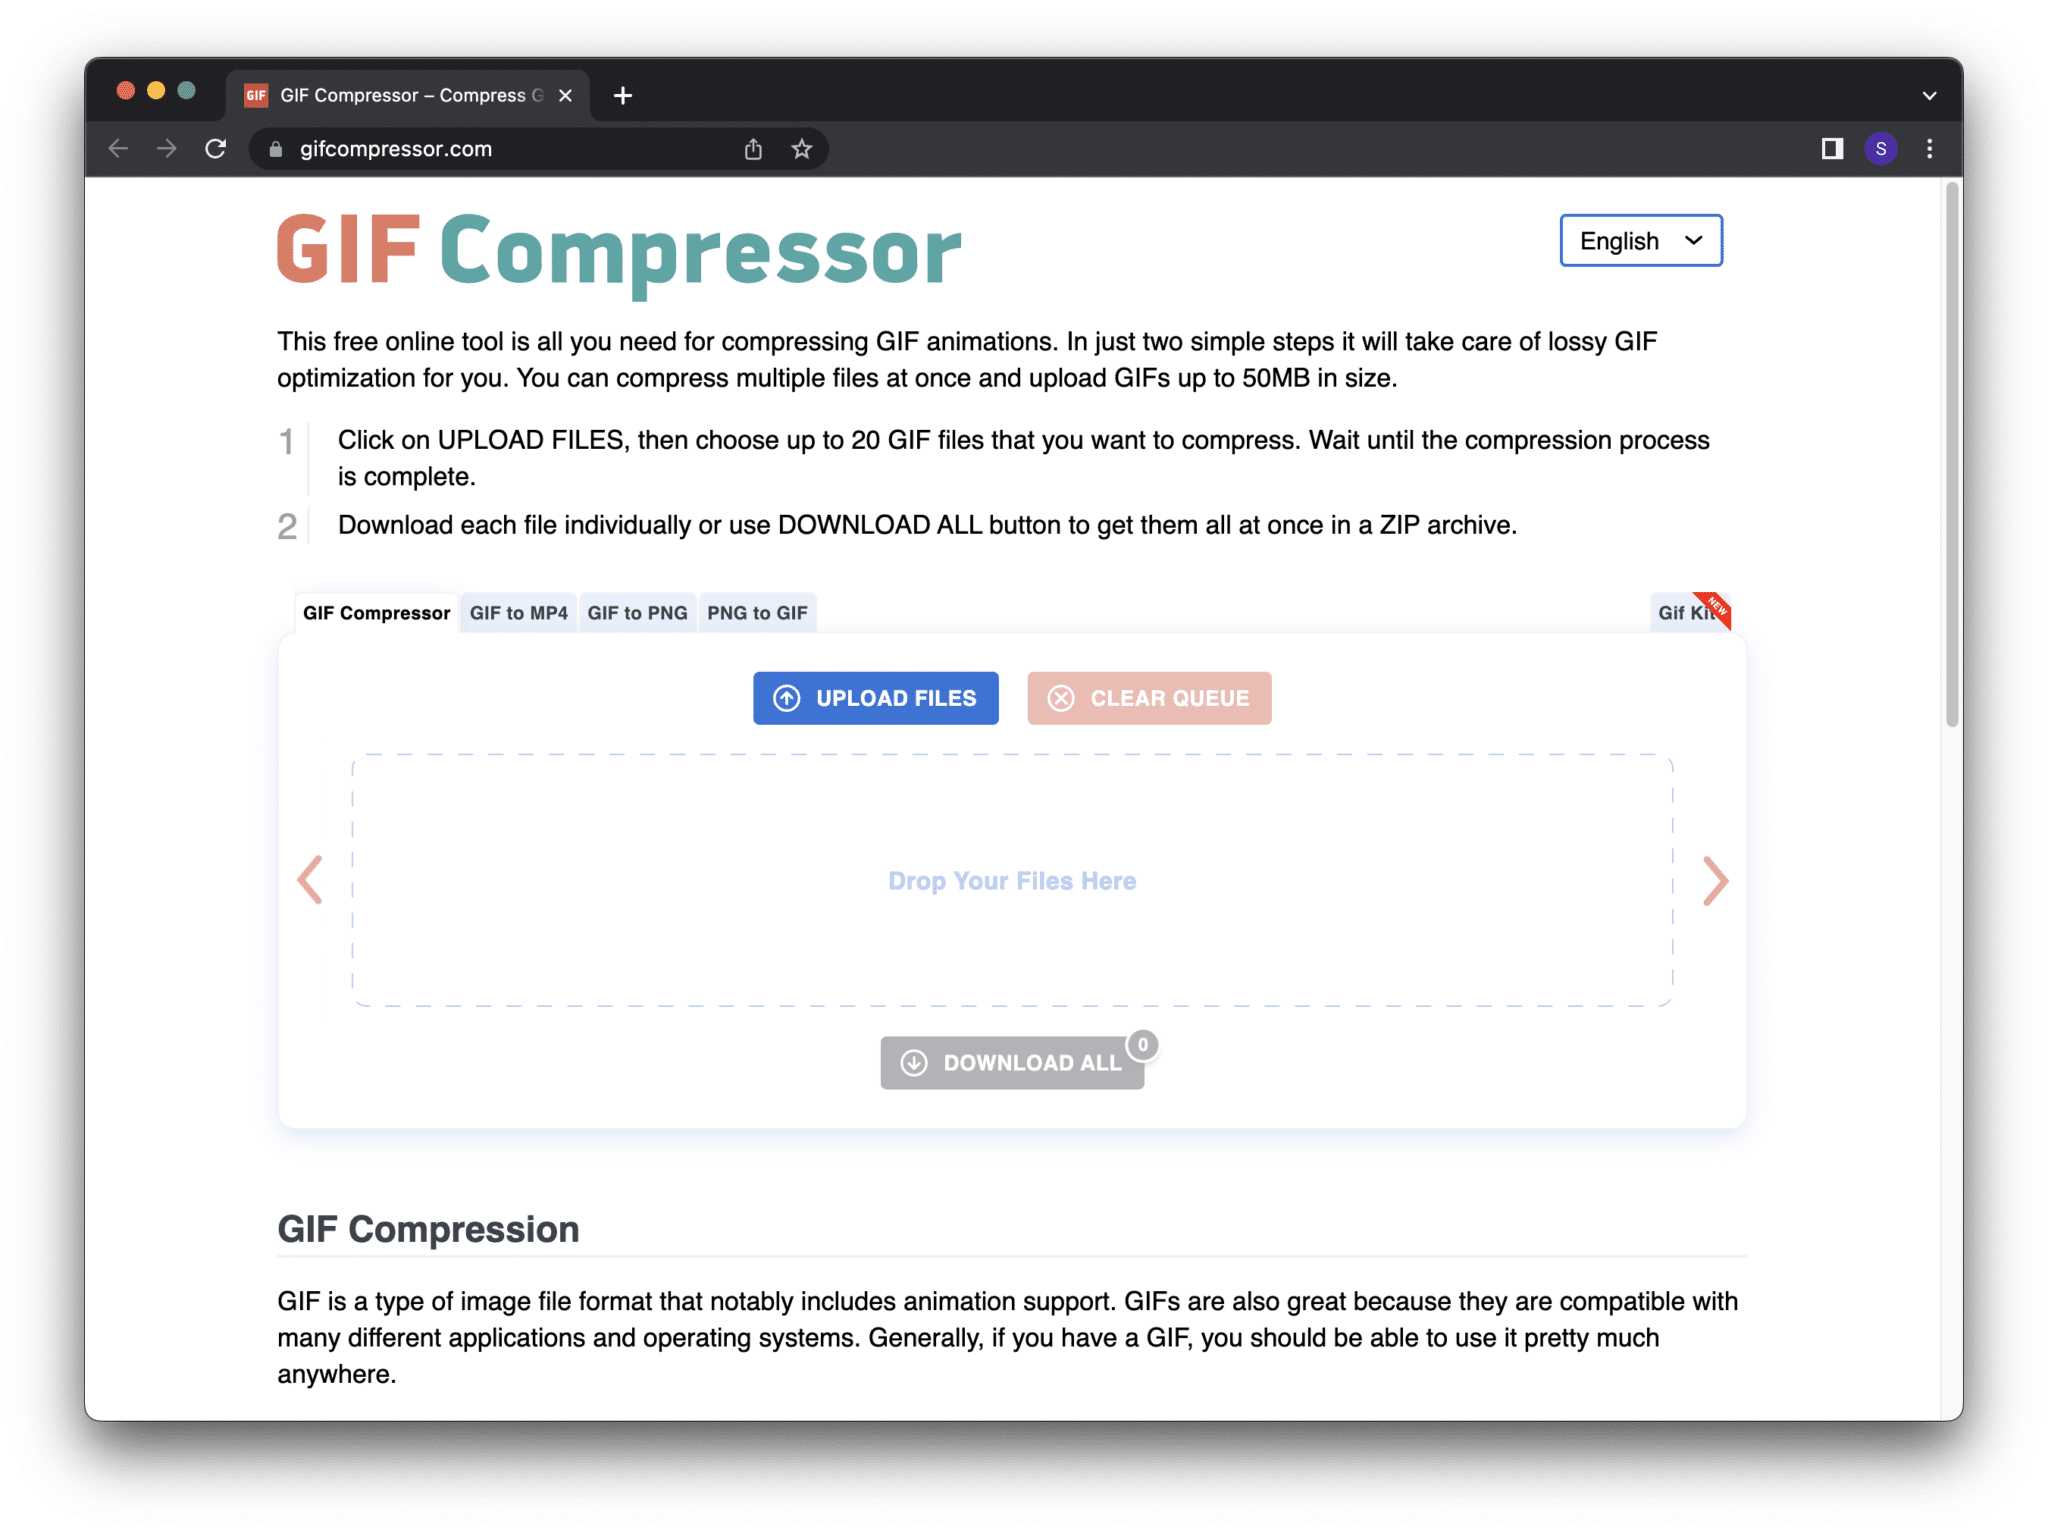 Compress your GIF file on GIF Compressor to fix GIF not working, playing, showing on WordPress website